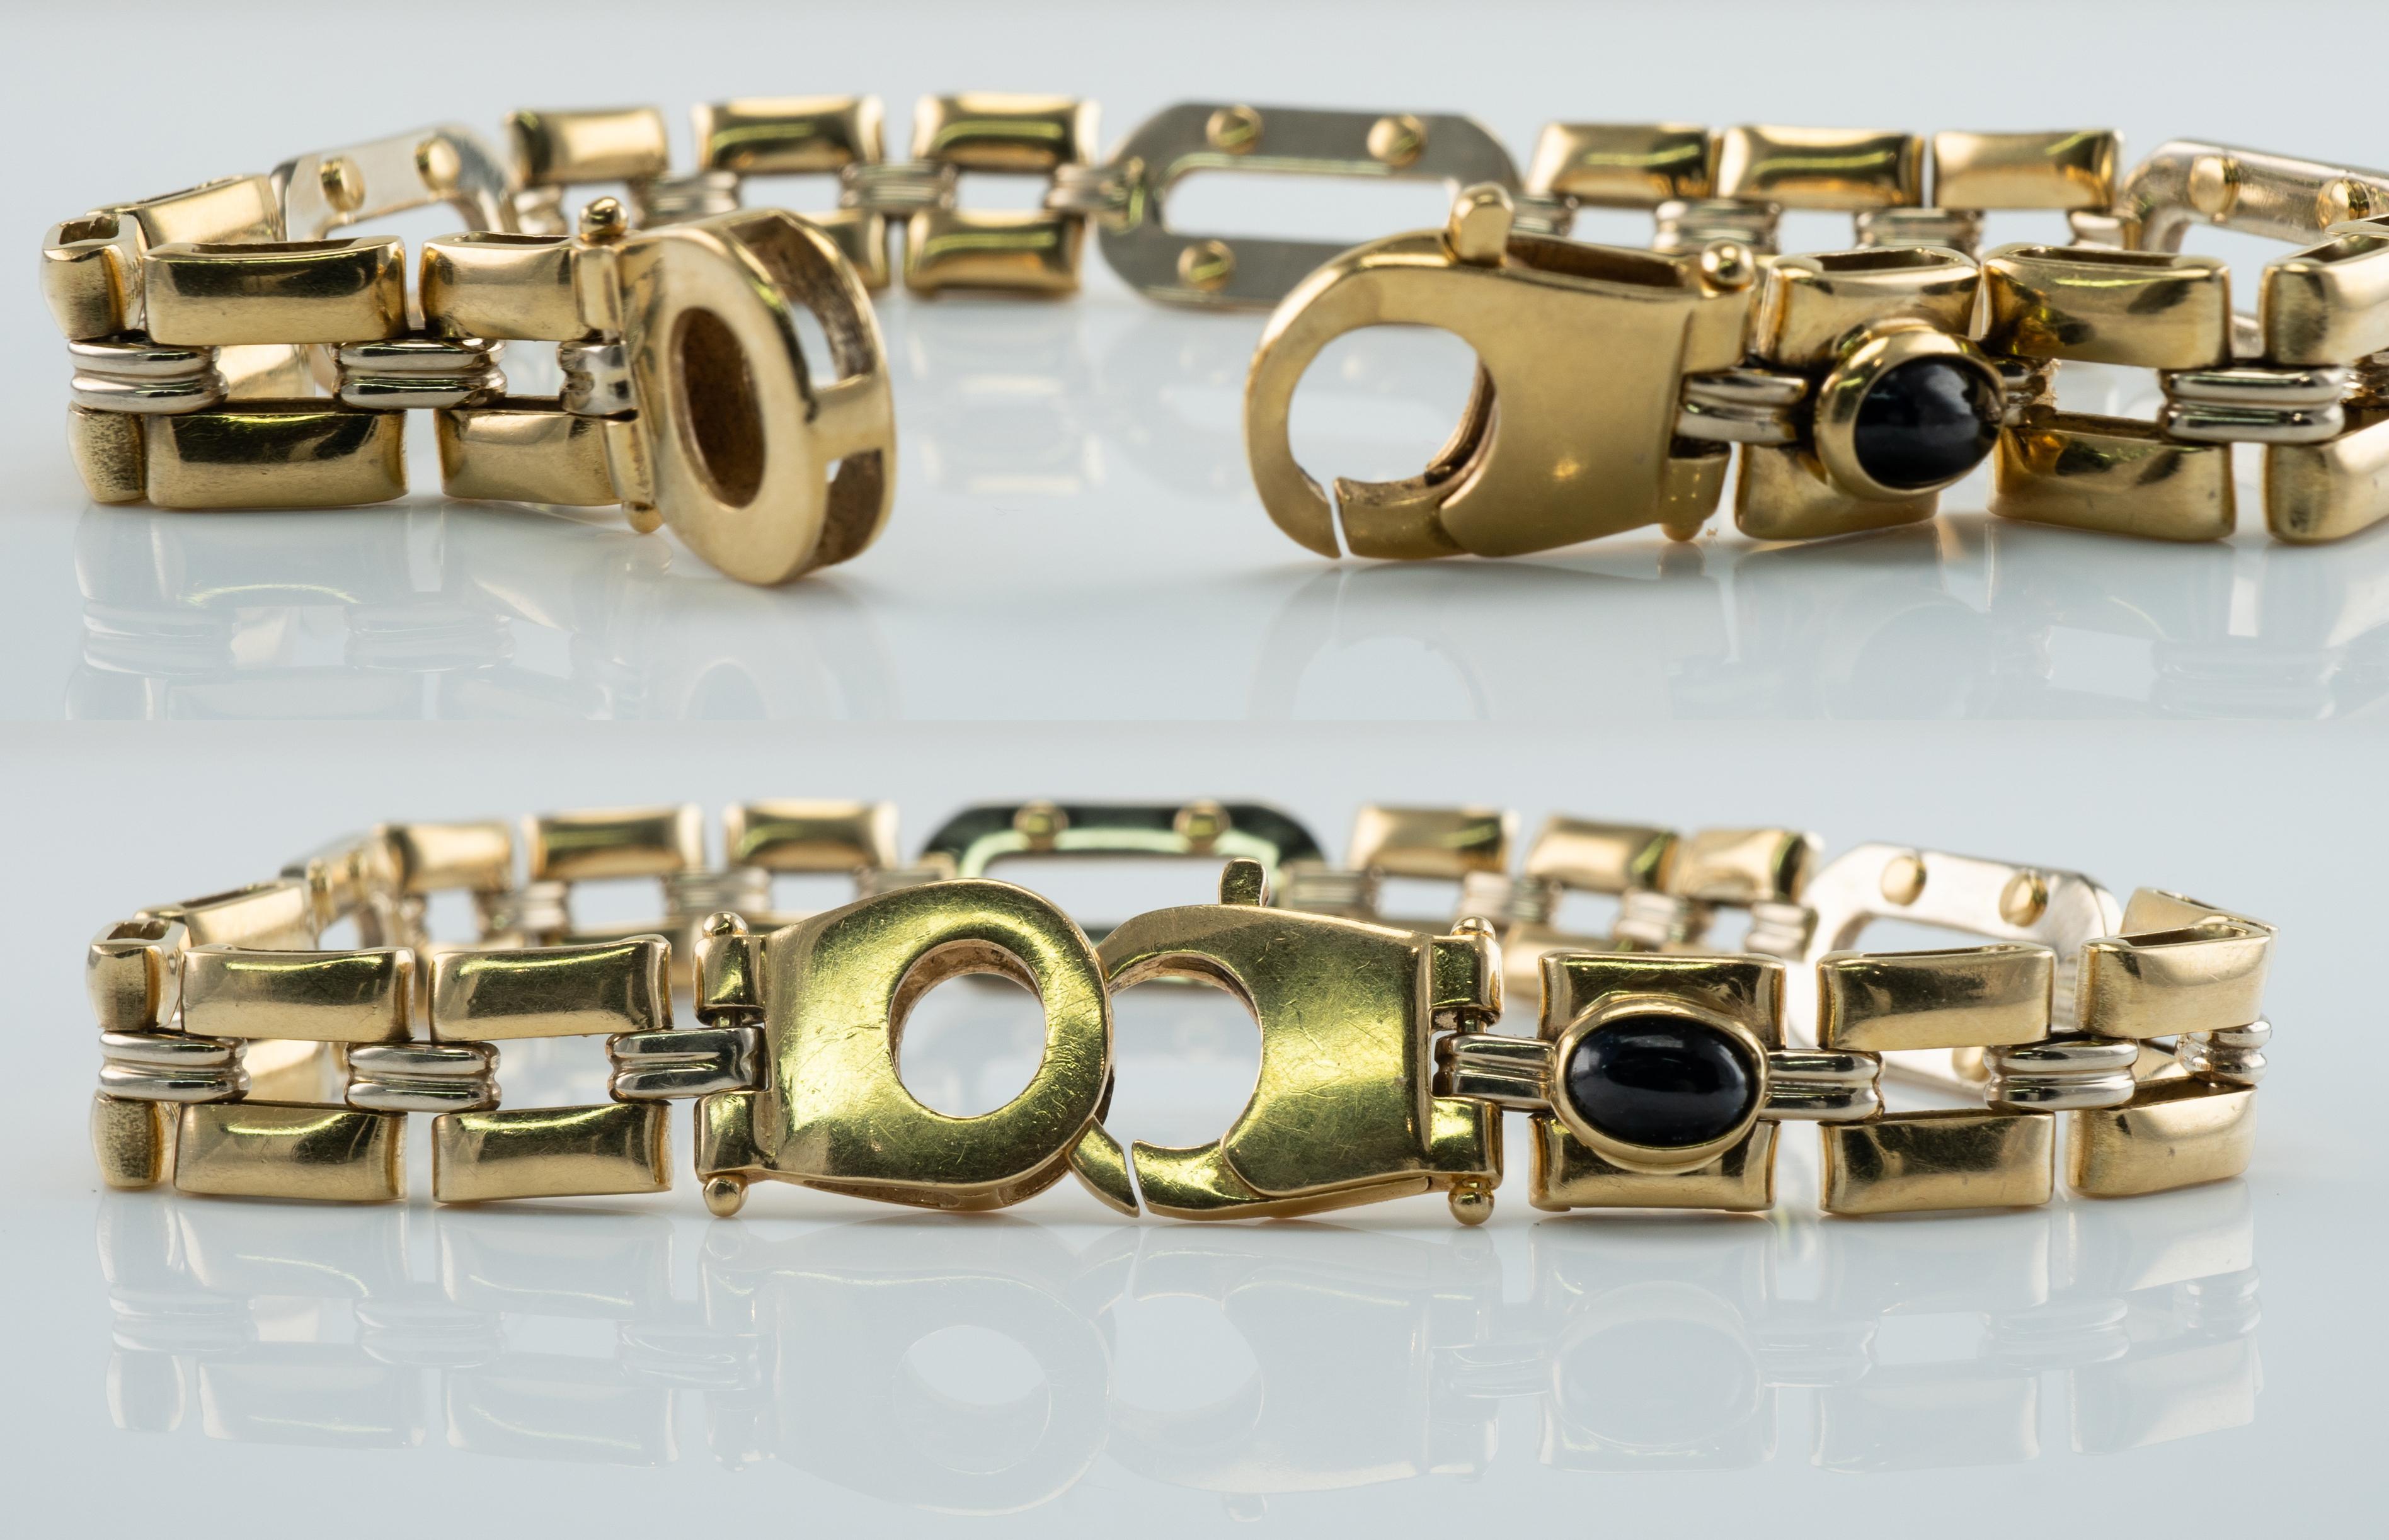 This estate bracelet for a man is crafted in solid 18K Yellow and White Gold.
The bracelet has a sturdy and comfortable clasp.
The bezel set black cabochon measures 6 x 4mm.
The bracelet is 8.25 inches long  x 9mm wide.
The weight is 29.0